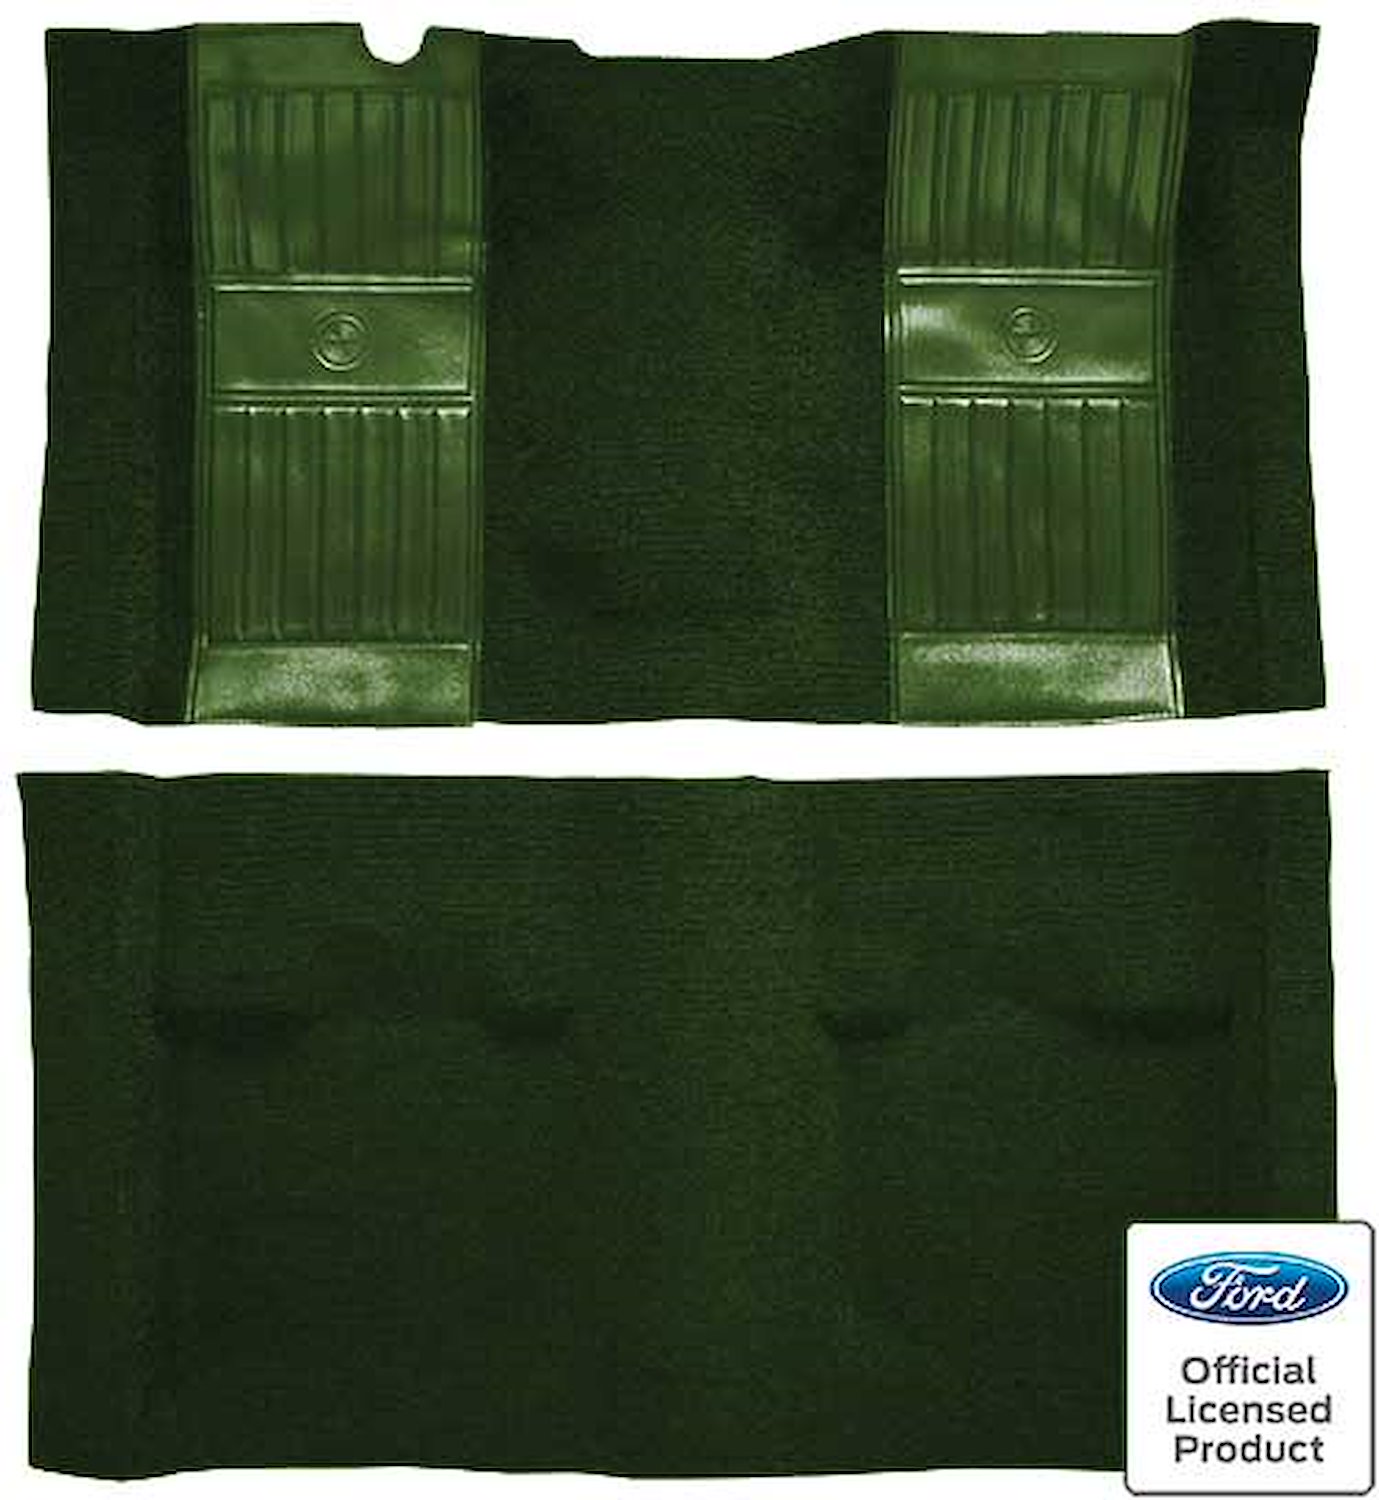 A4105B39 Nylon Loop Floor Carpet With Mass Backing 1969 Mustang Mach 1; Green/Green Inserts